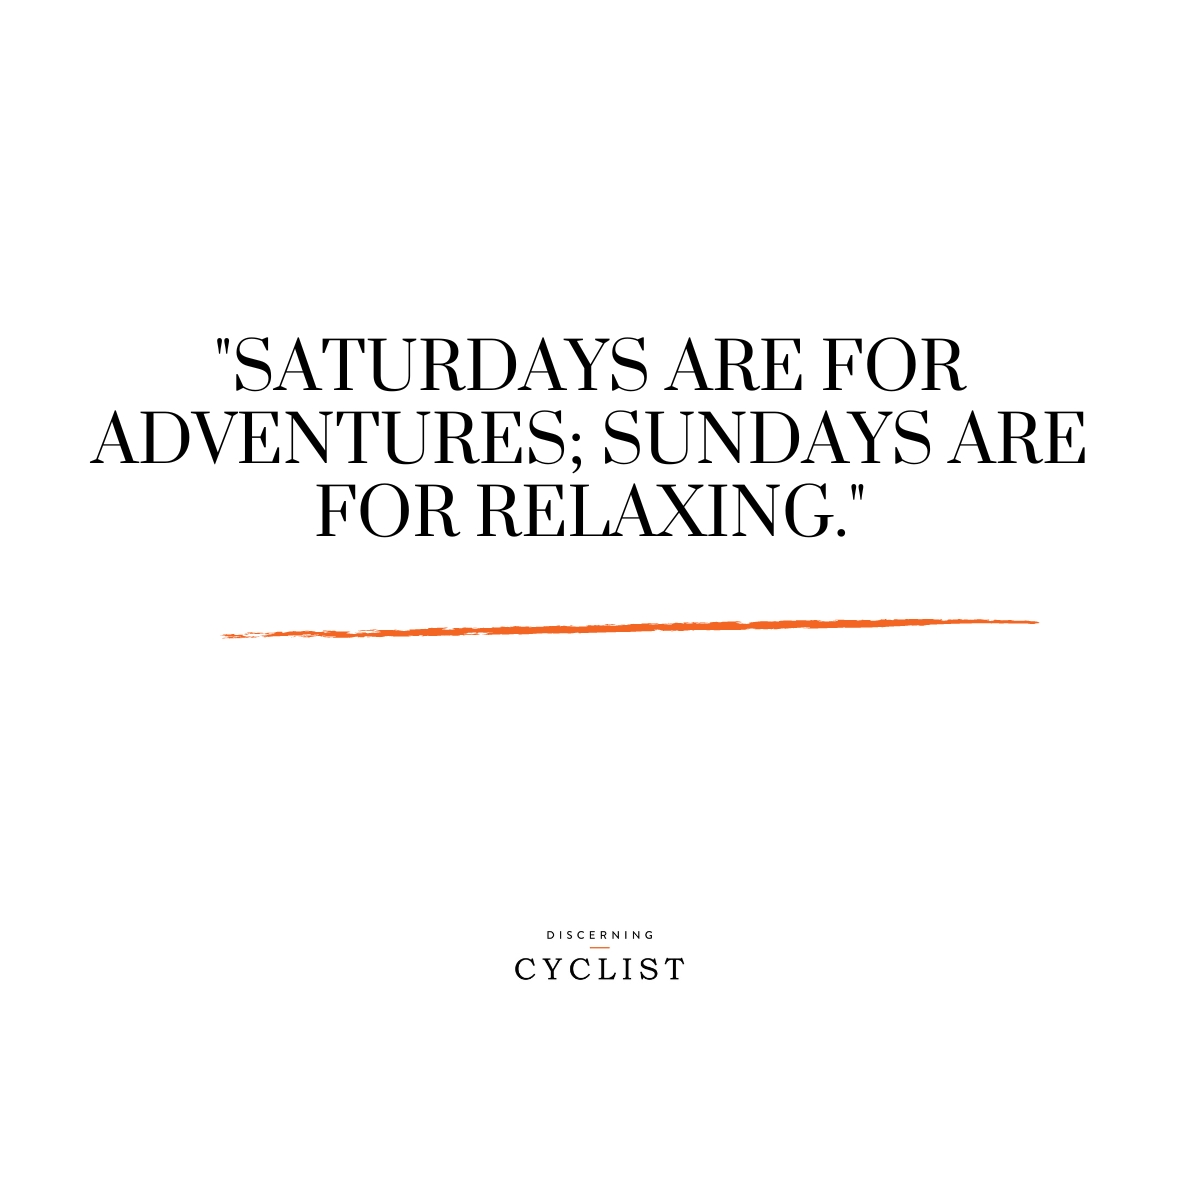 "Saturdays are for adventures; Sundays are for relaxing."